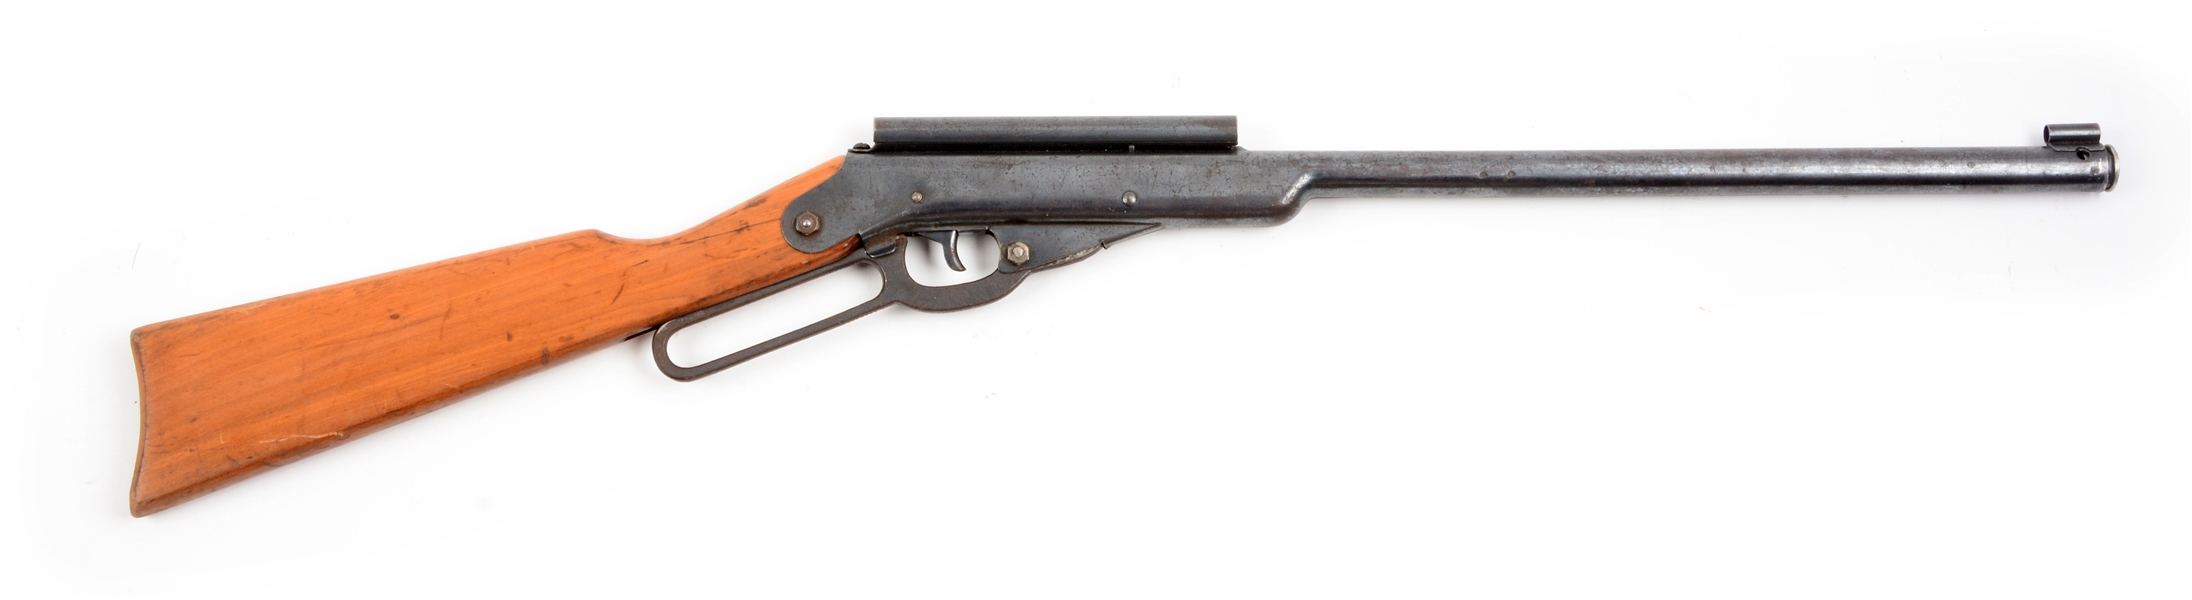 DAISY MODEL 195 BUZZ BARTON SPECIAL WITH TWO DAISY BUZZ BARTON SIX-SHOOTERS WITH HOLSTER AND ORIGINAL BOX. 